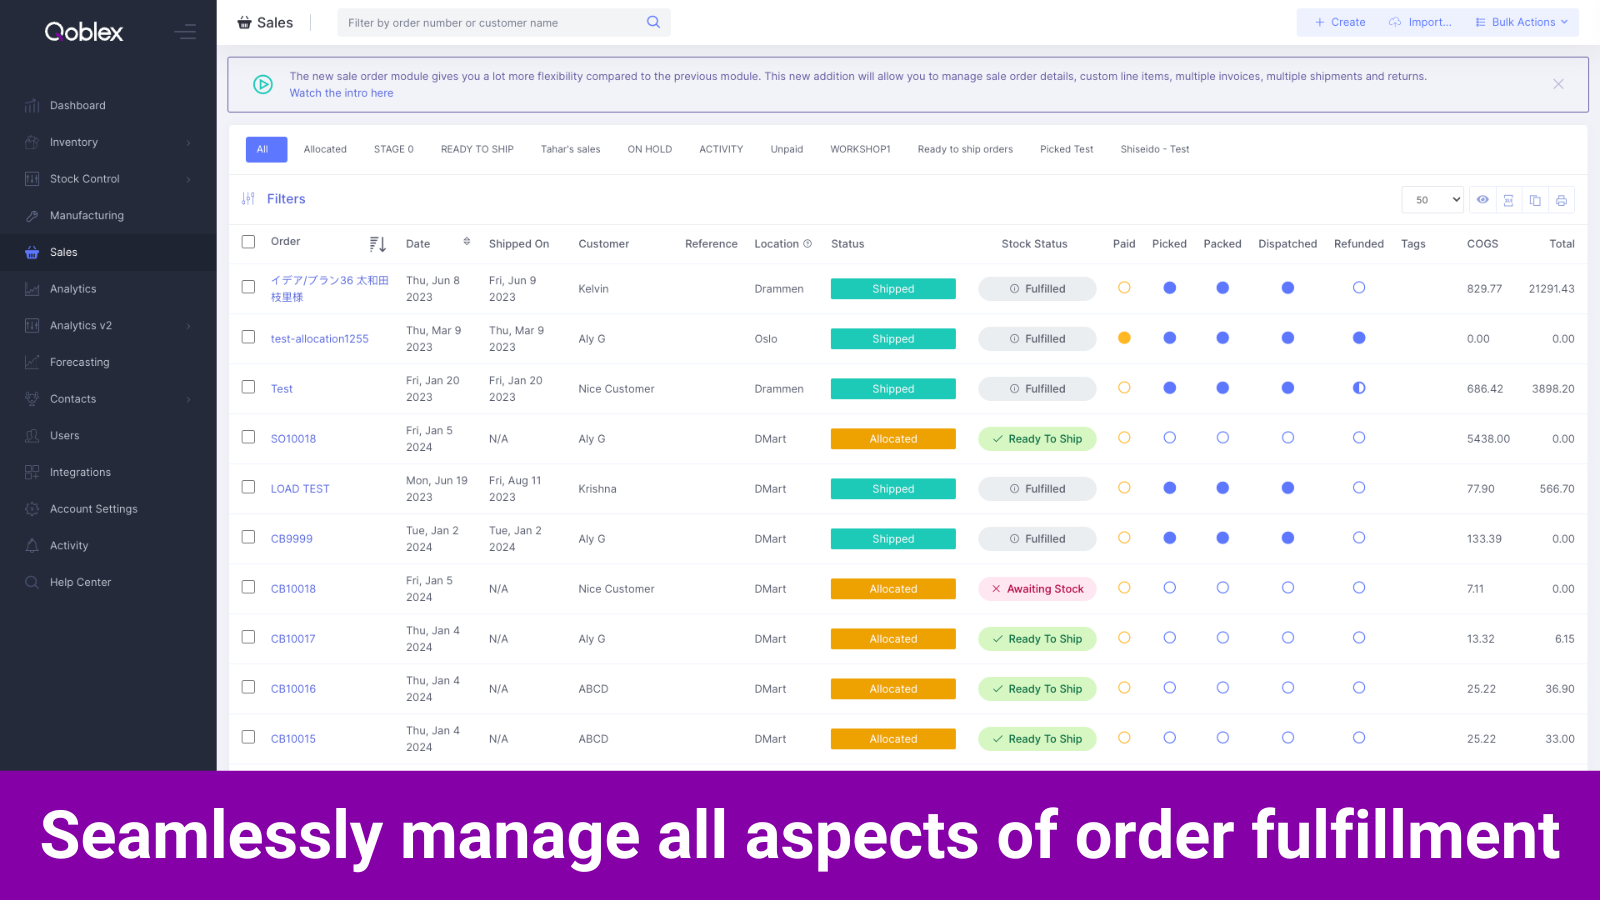 Qoblex - Seamlessly manage all aspects of order fulfillment